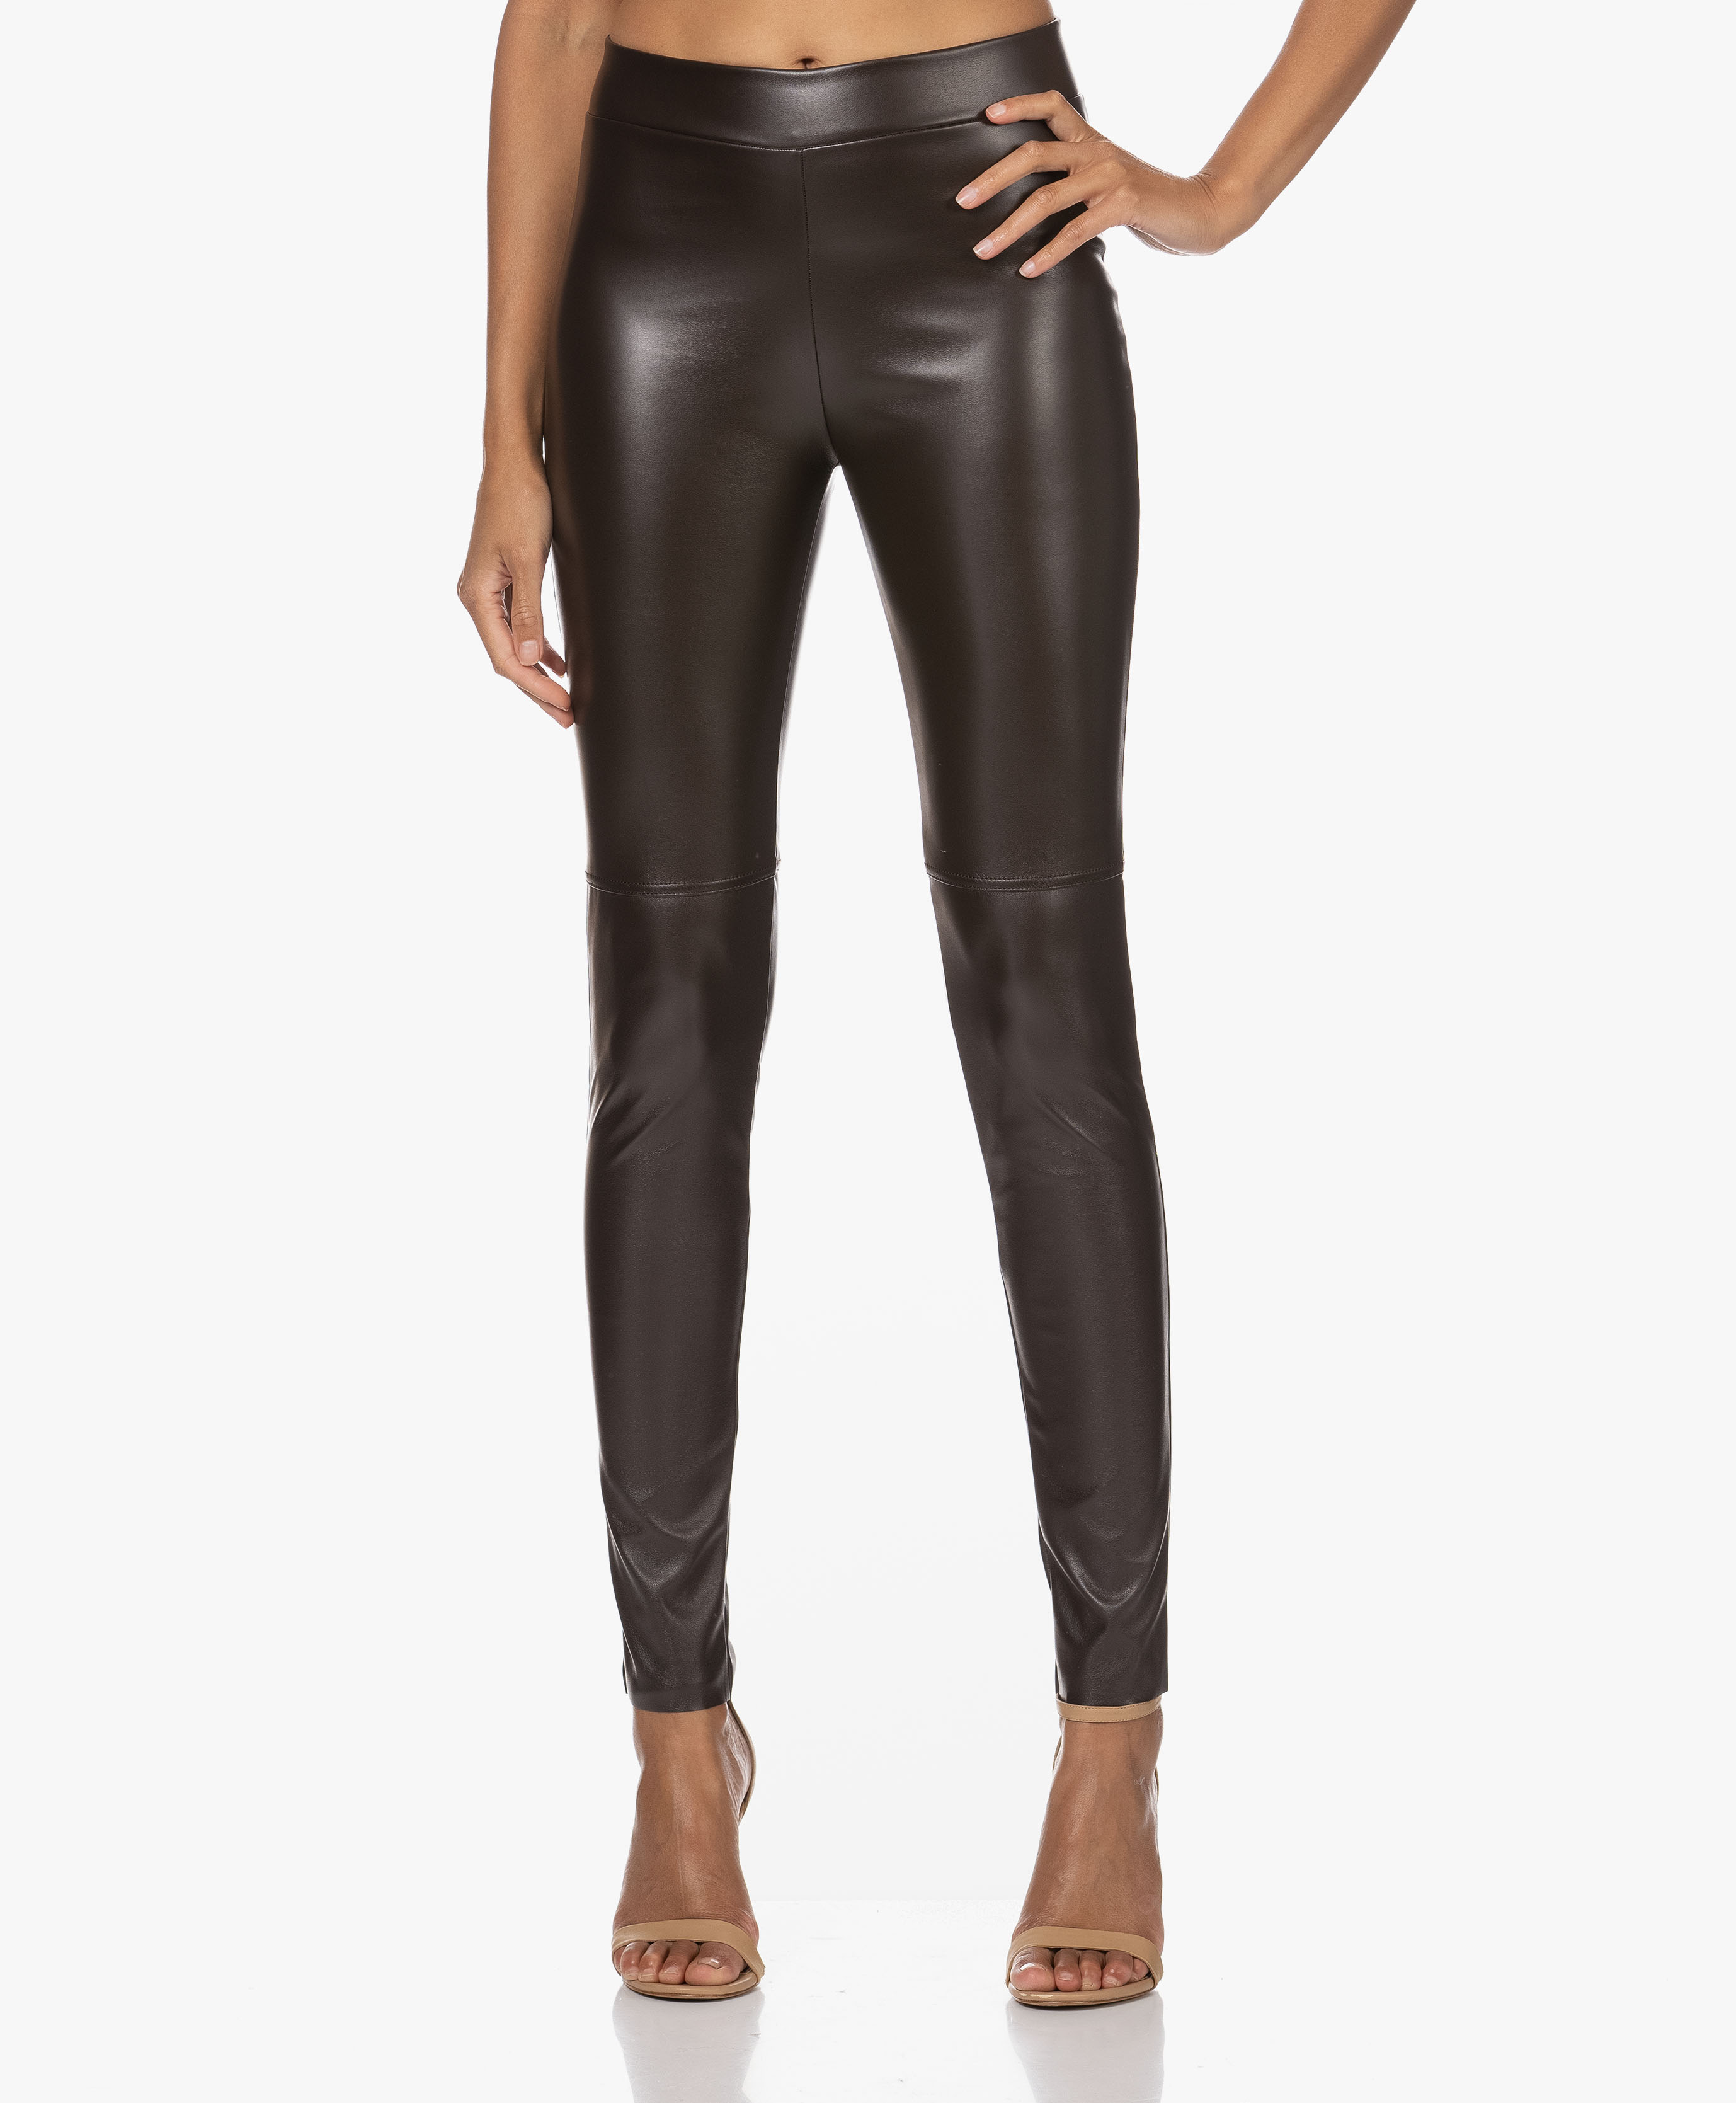 Wolford Estella Faux Leather Leggings Soft Cacao - 19156 4825 - soft cacao